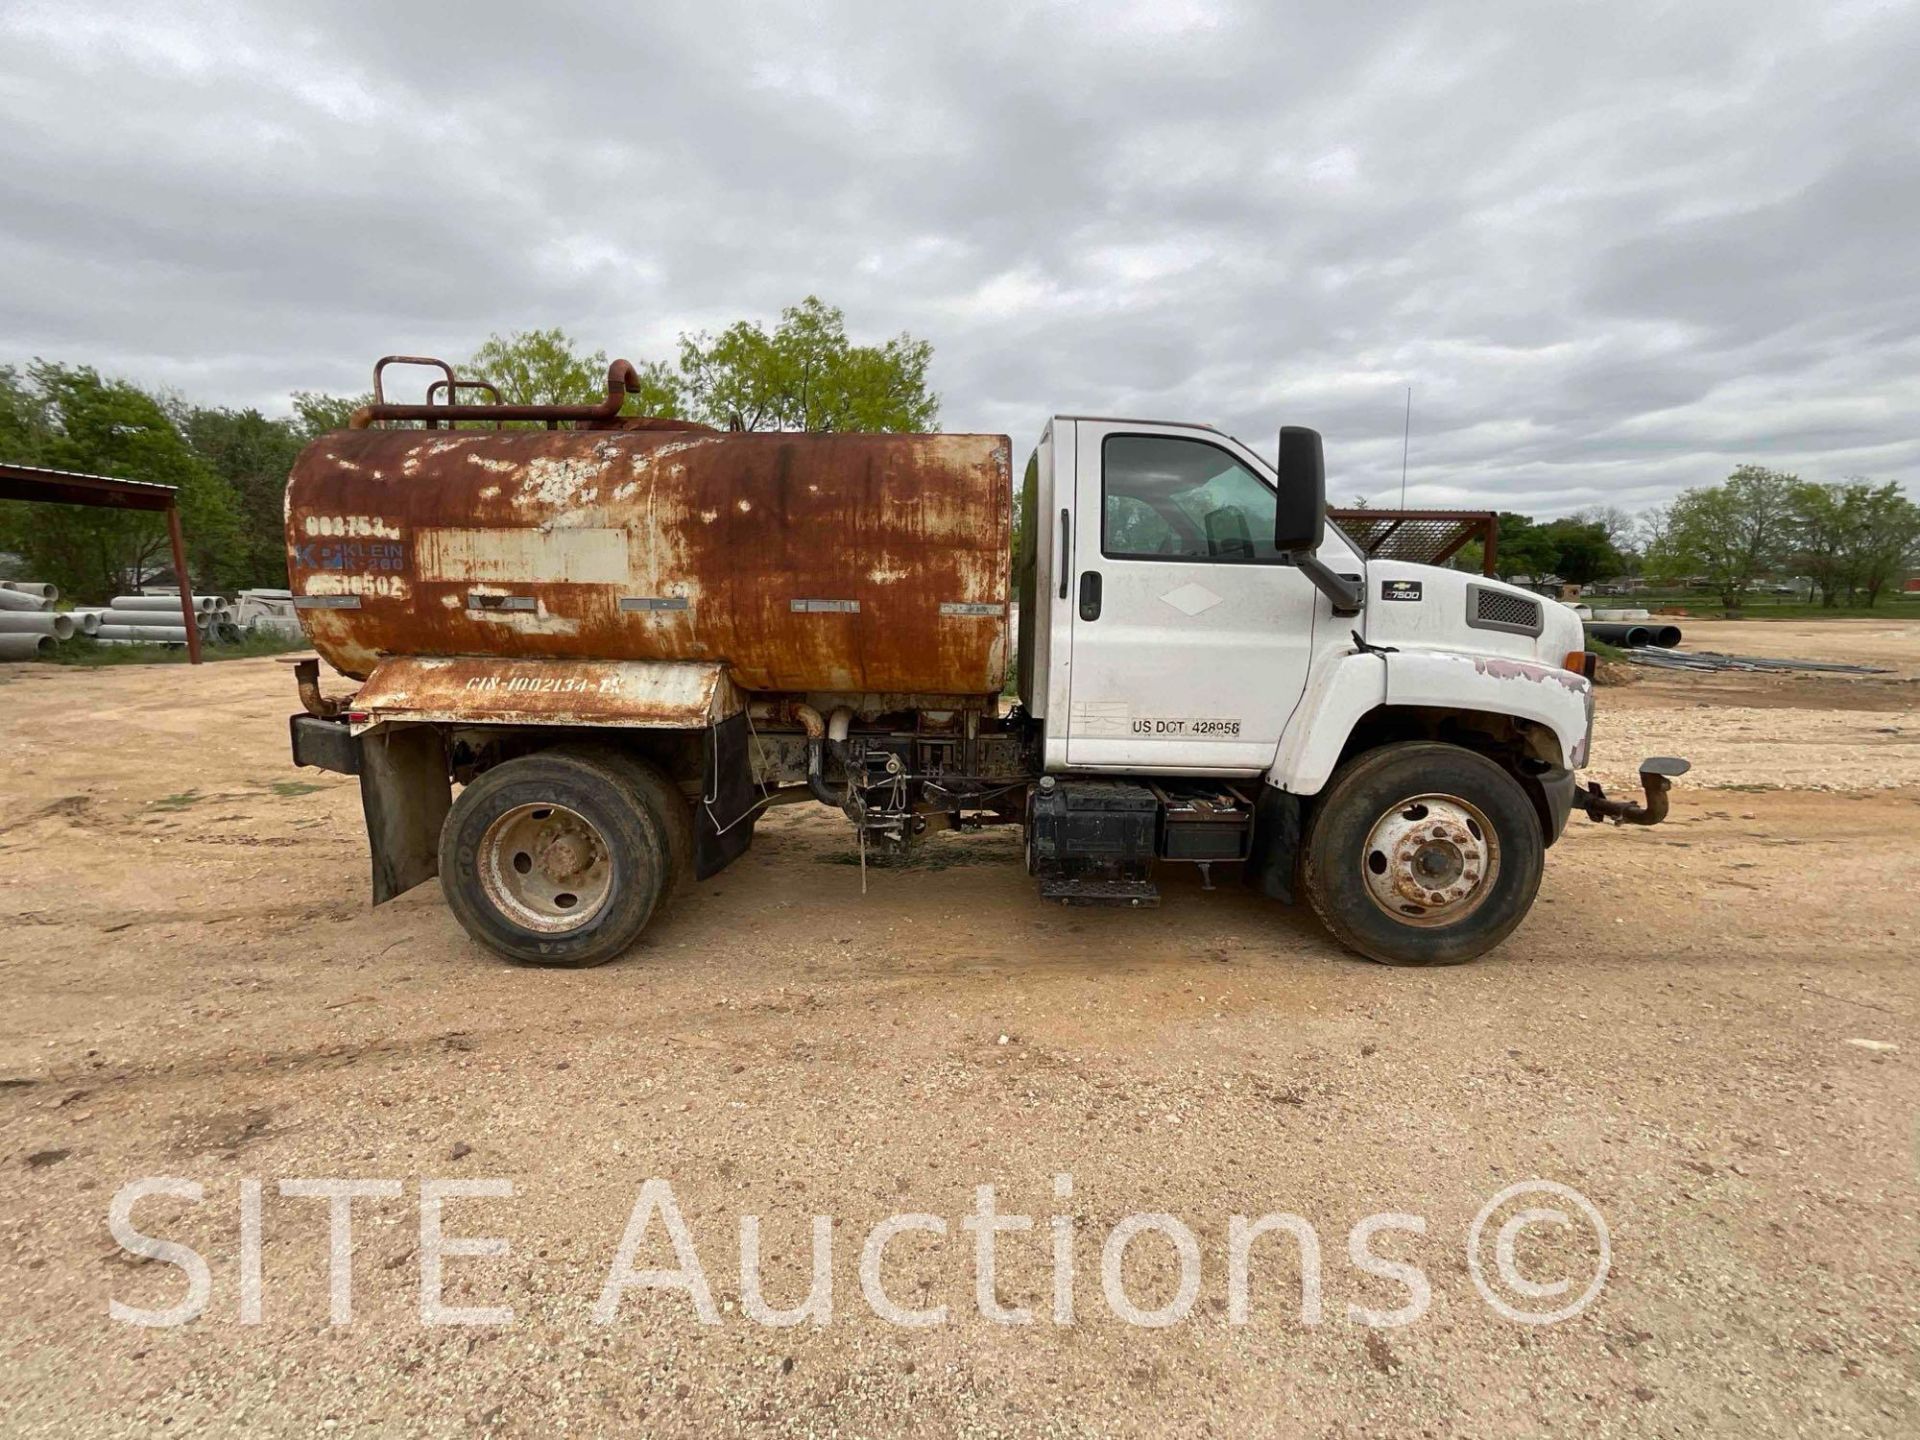 2004 Chevrolet C7500 S/A Water Truck - Image 2 of 10